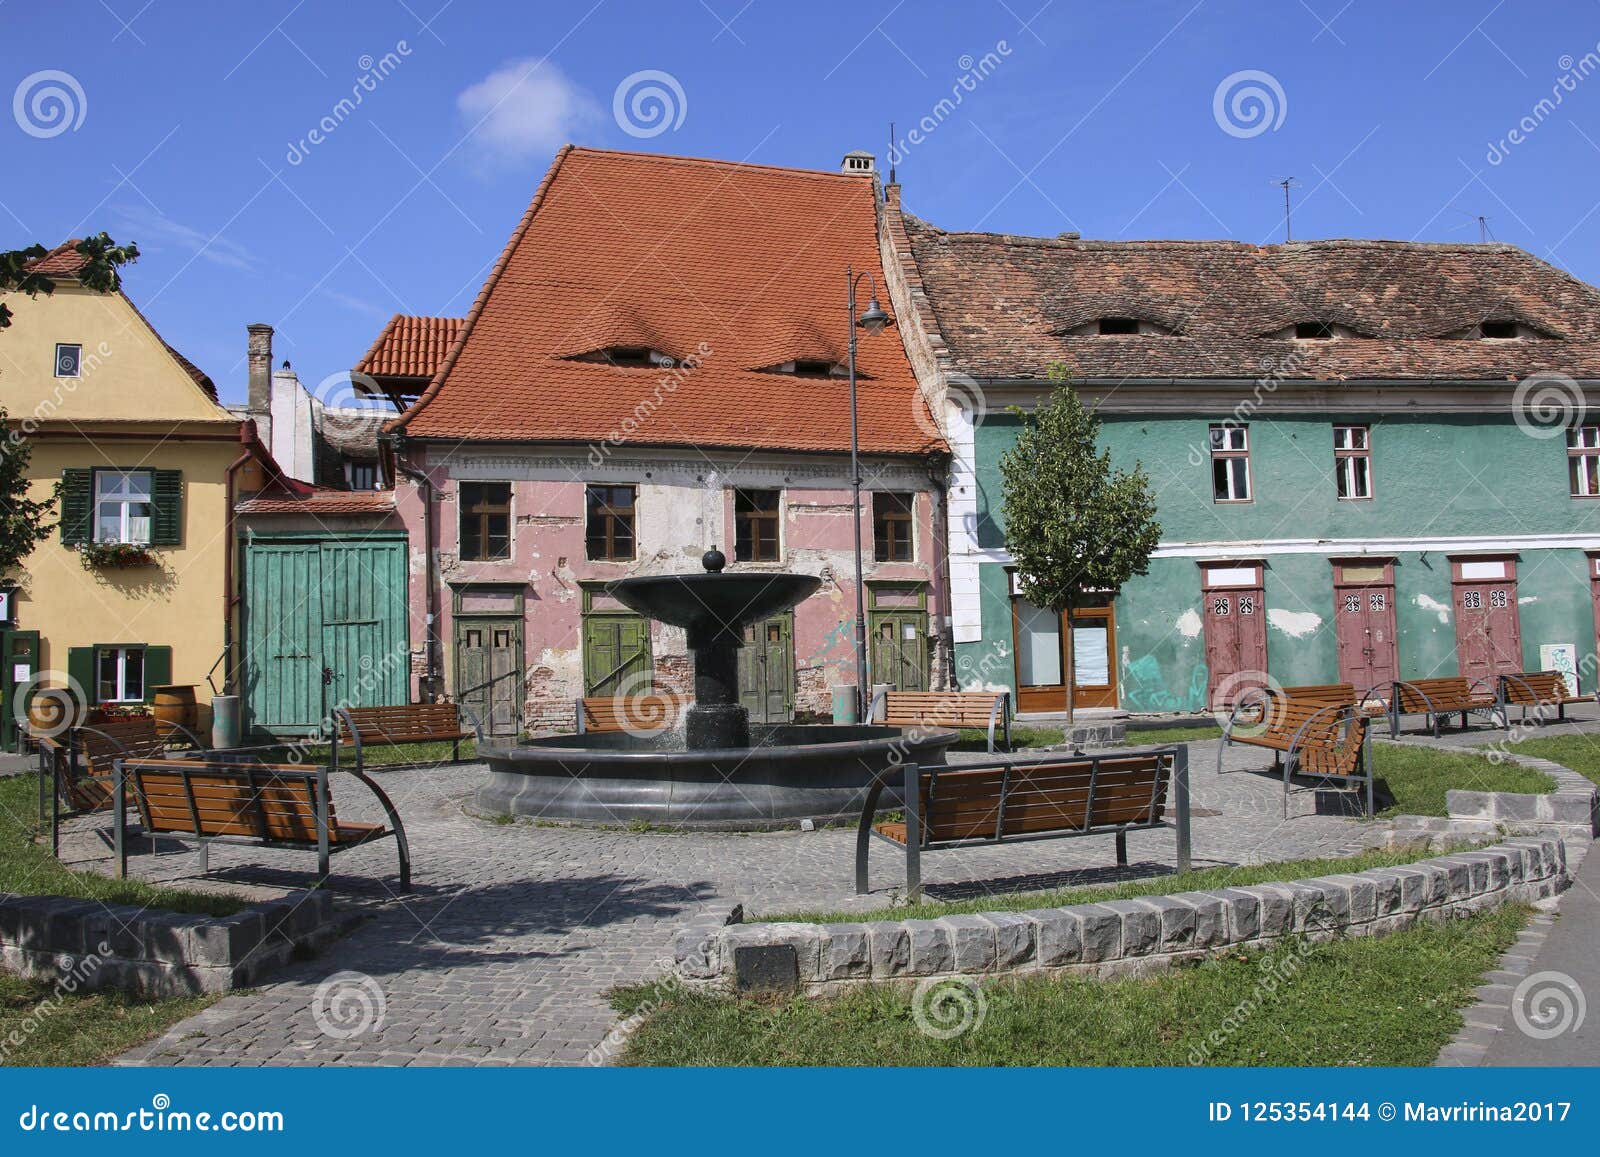 Historical Old Buildings In The Medieval City Sibiu Hermannstadt Romania Stock Photo Image Of Church Medieval 125354144